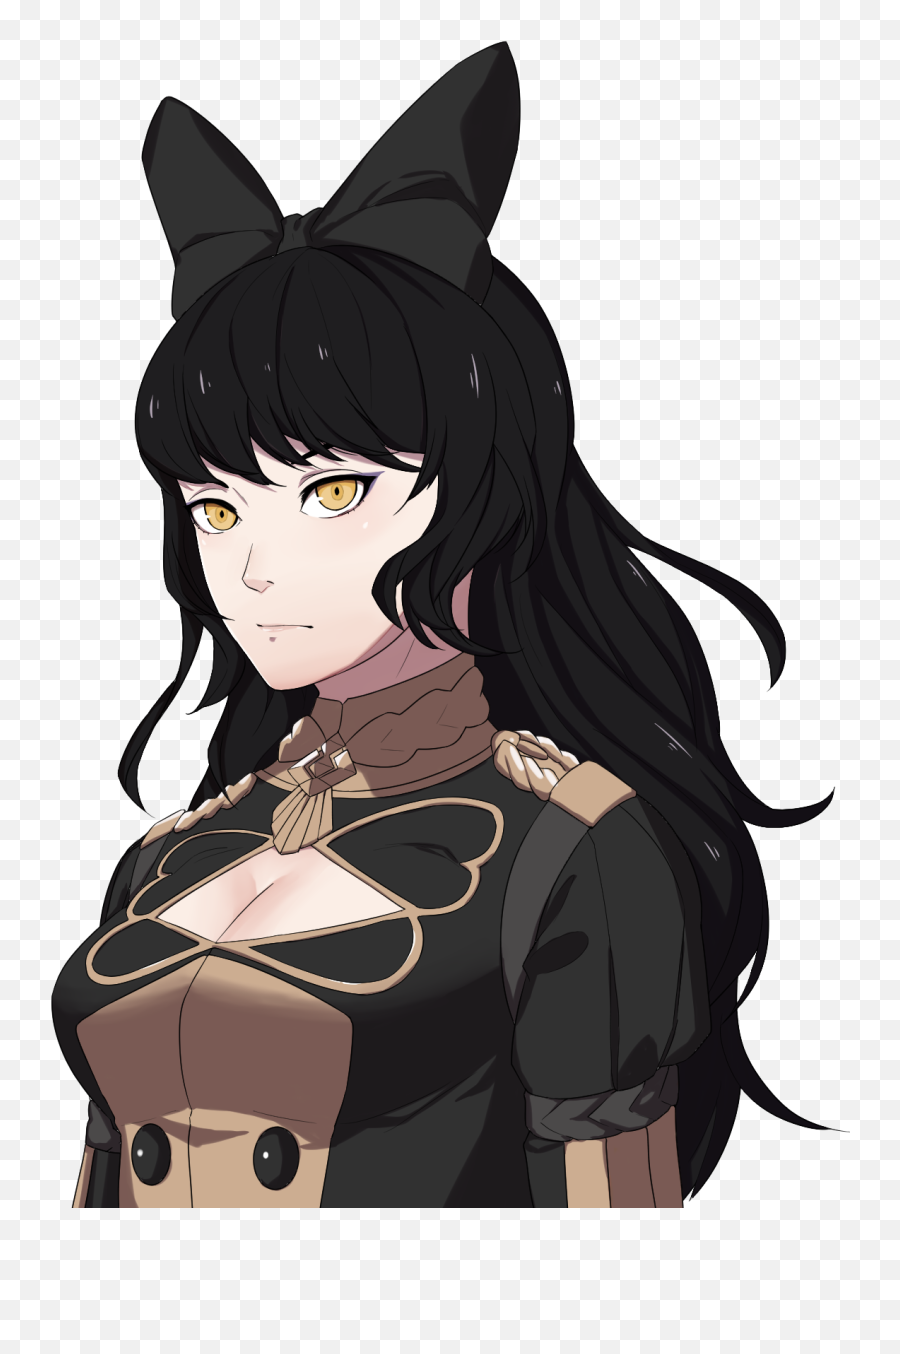 Blake From Rwby As A Officer Academy - Rwby 3 Emoji,Why Must You Play This Game Of Emotions Rwby